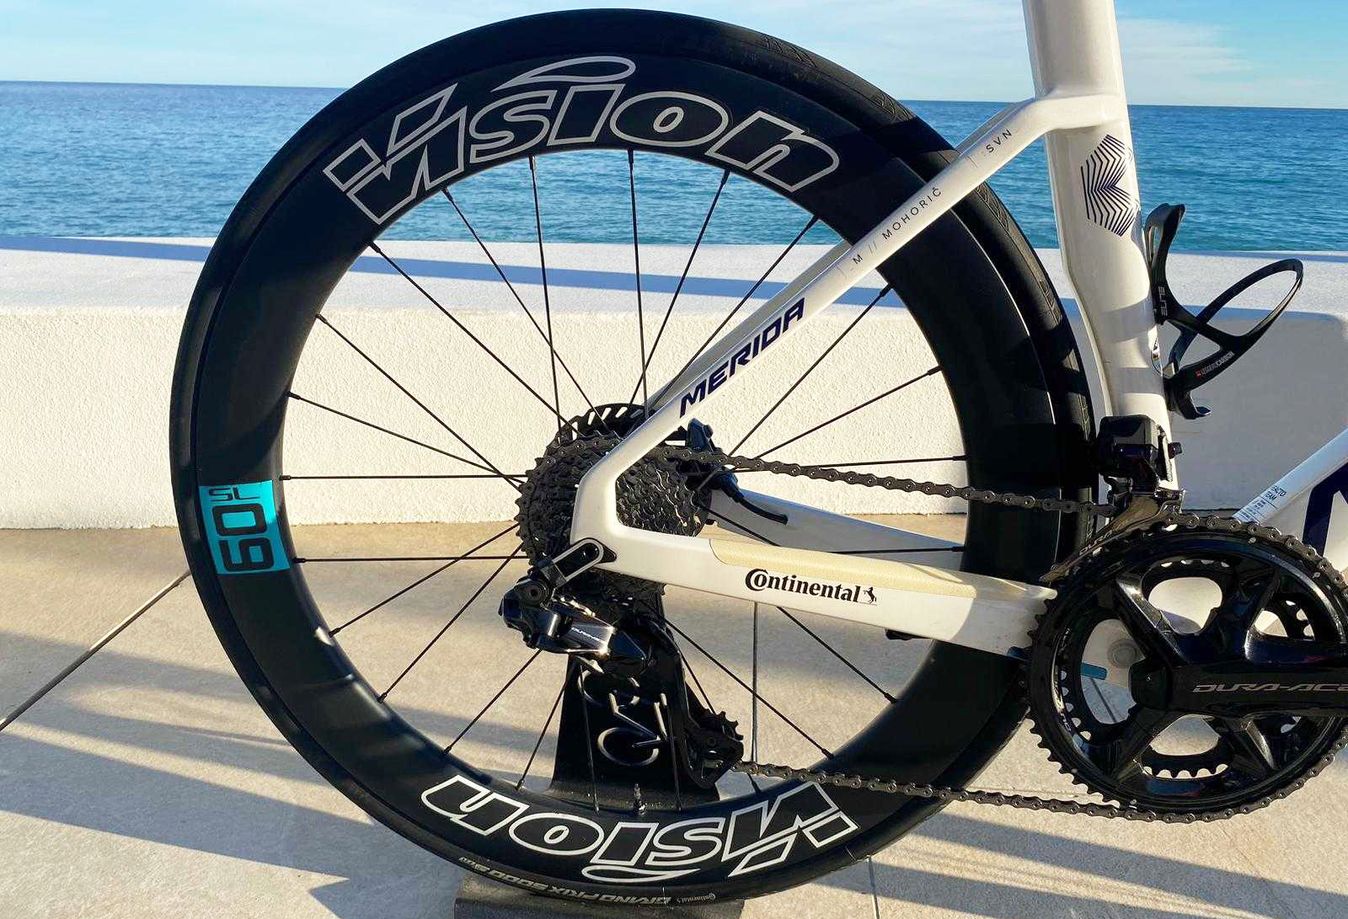 The deep-sectioned Vision Metron wheels